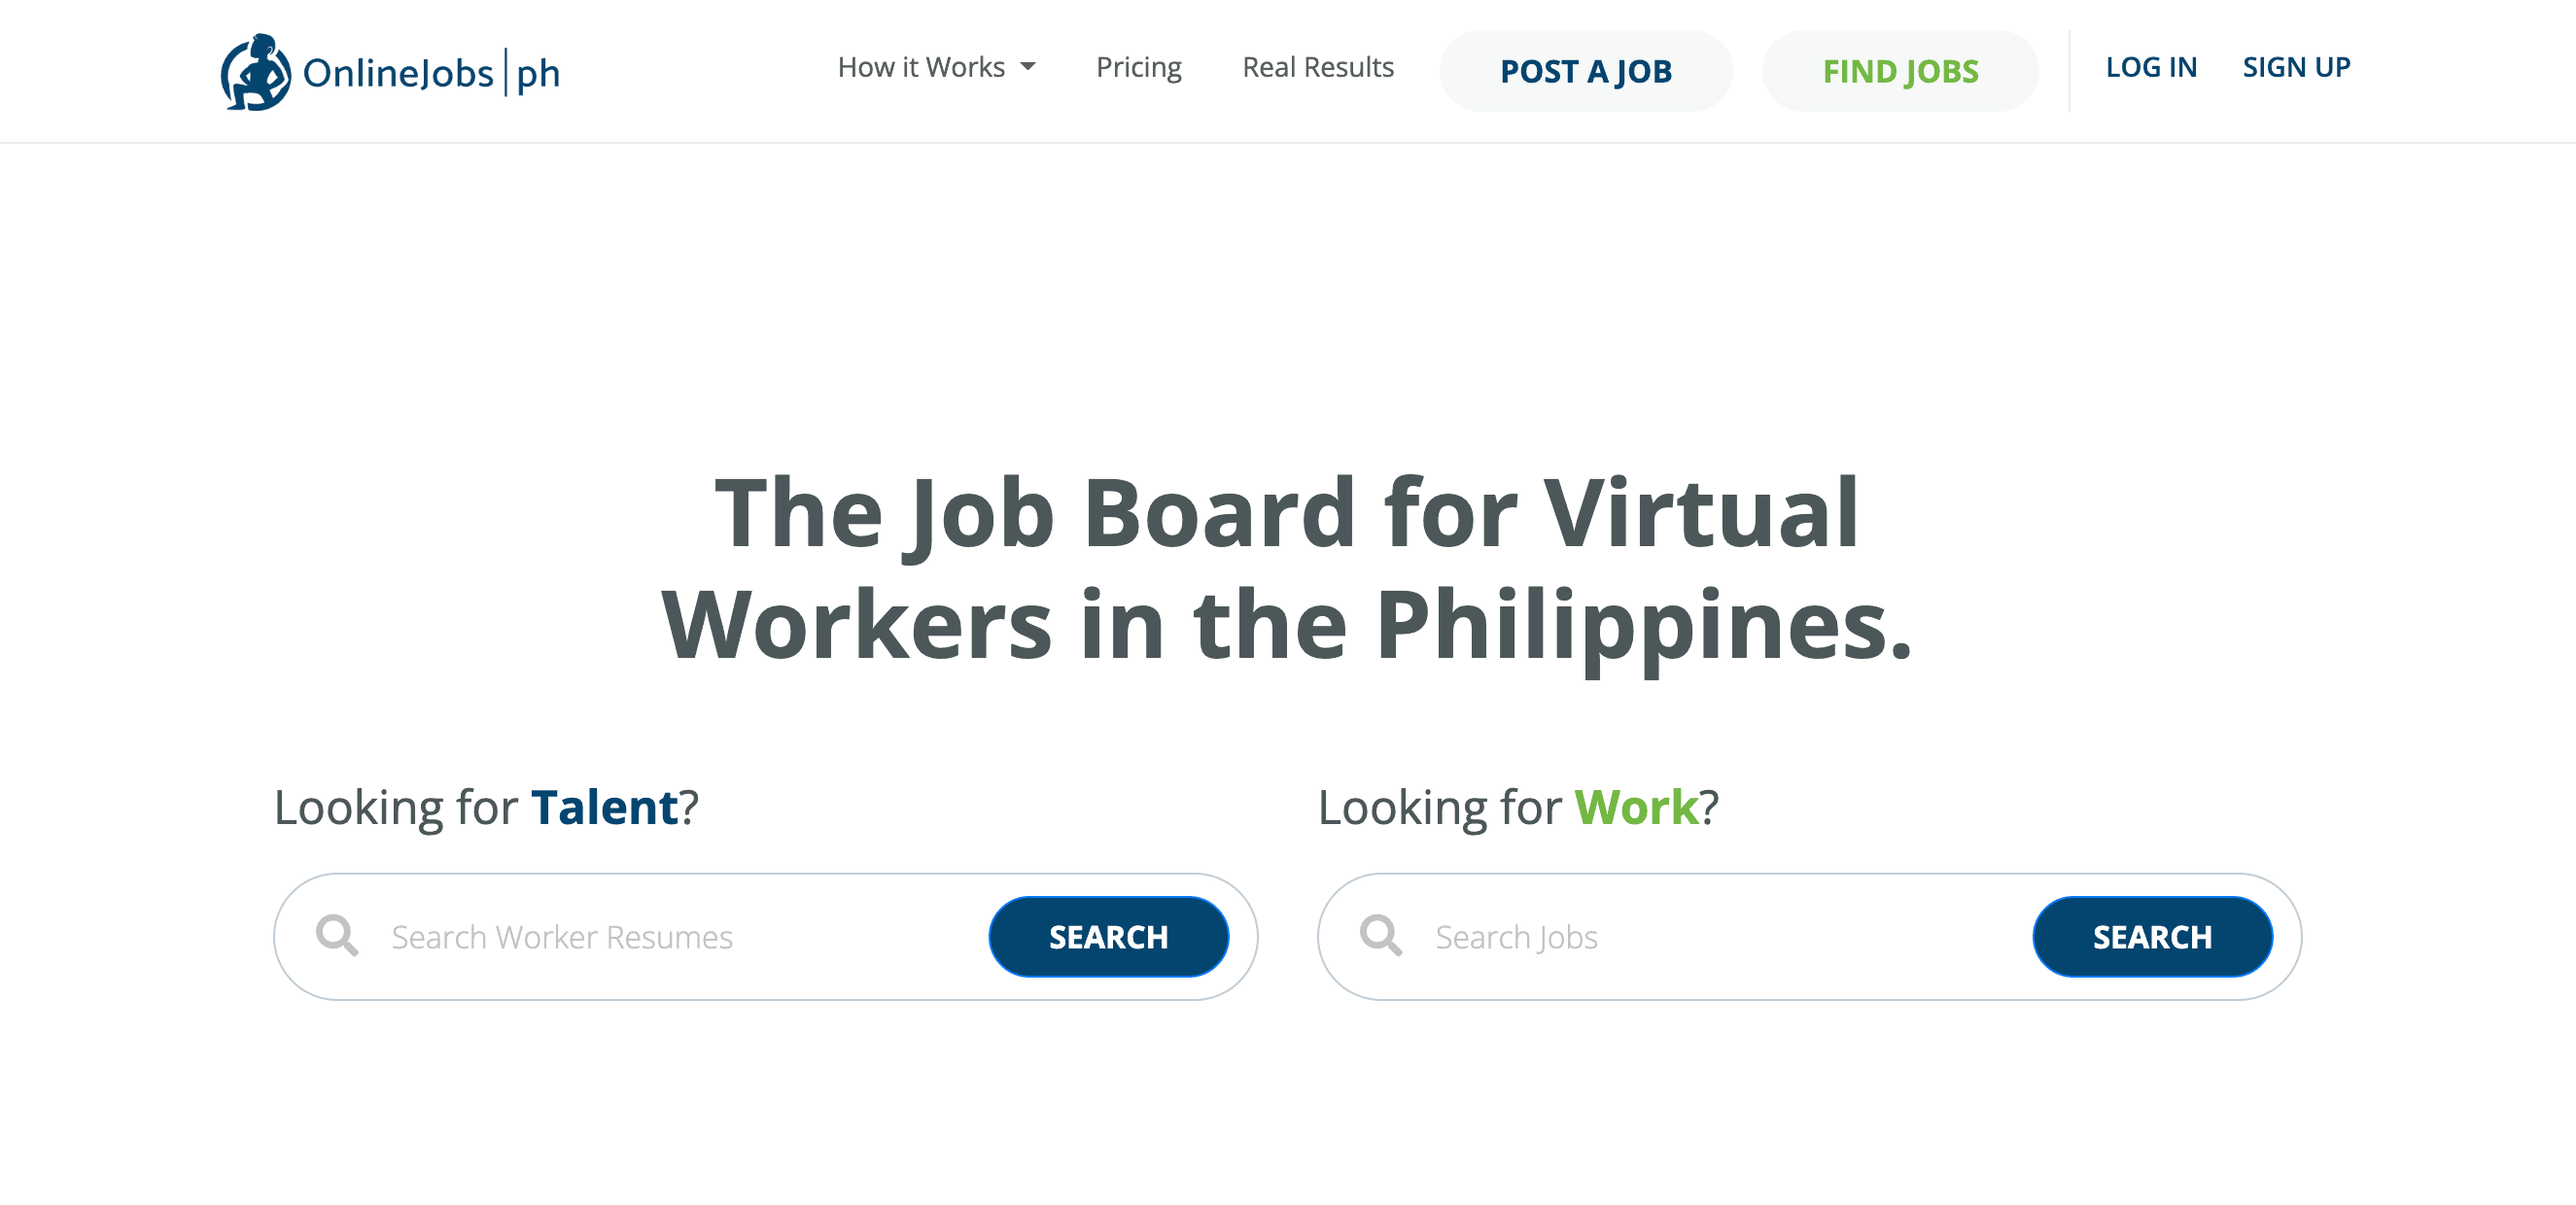 A screenshot of the OnlineJobs.ph home page.